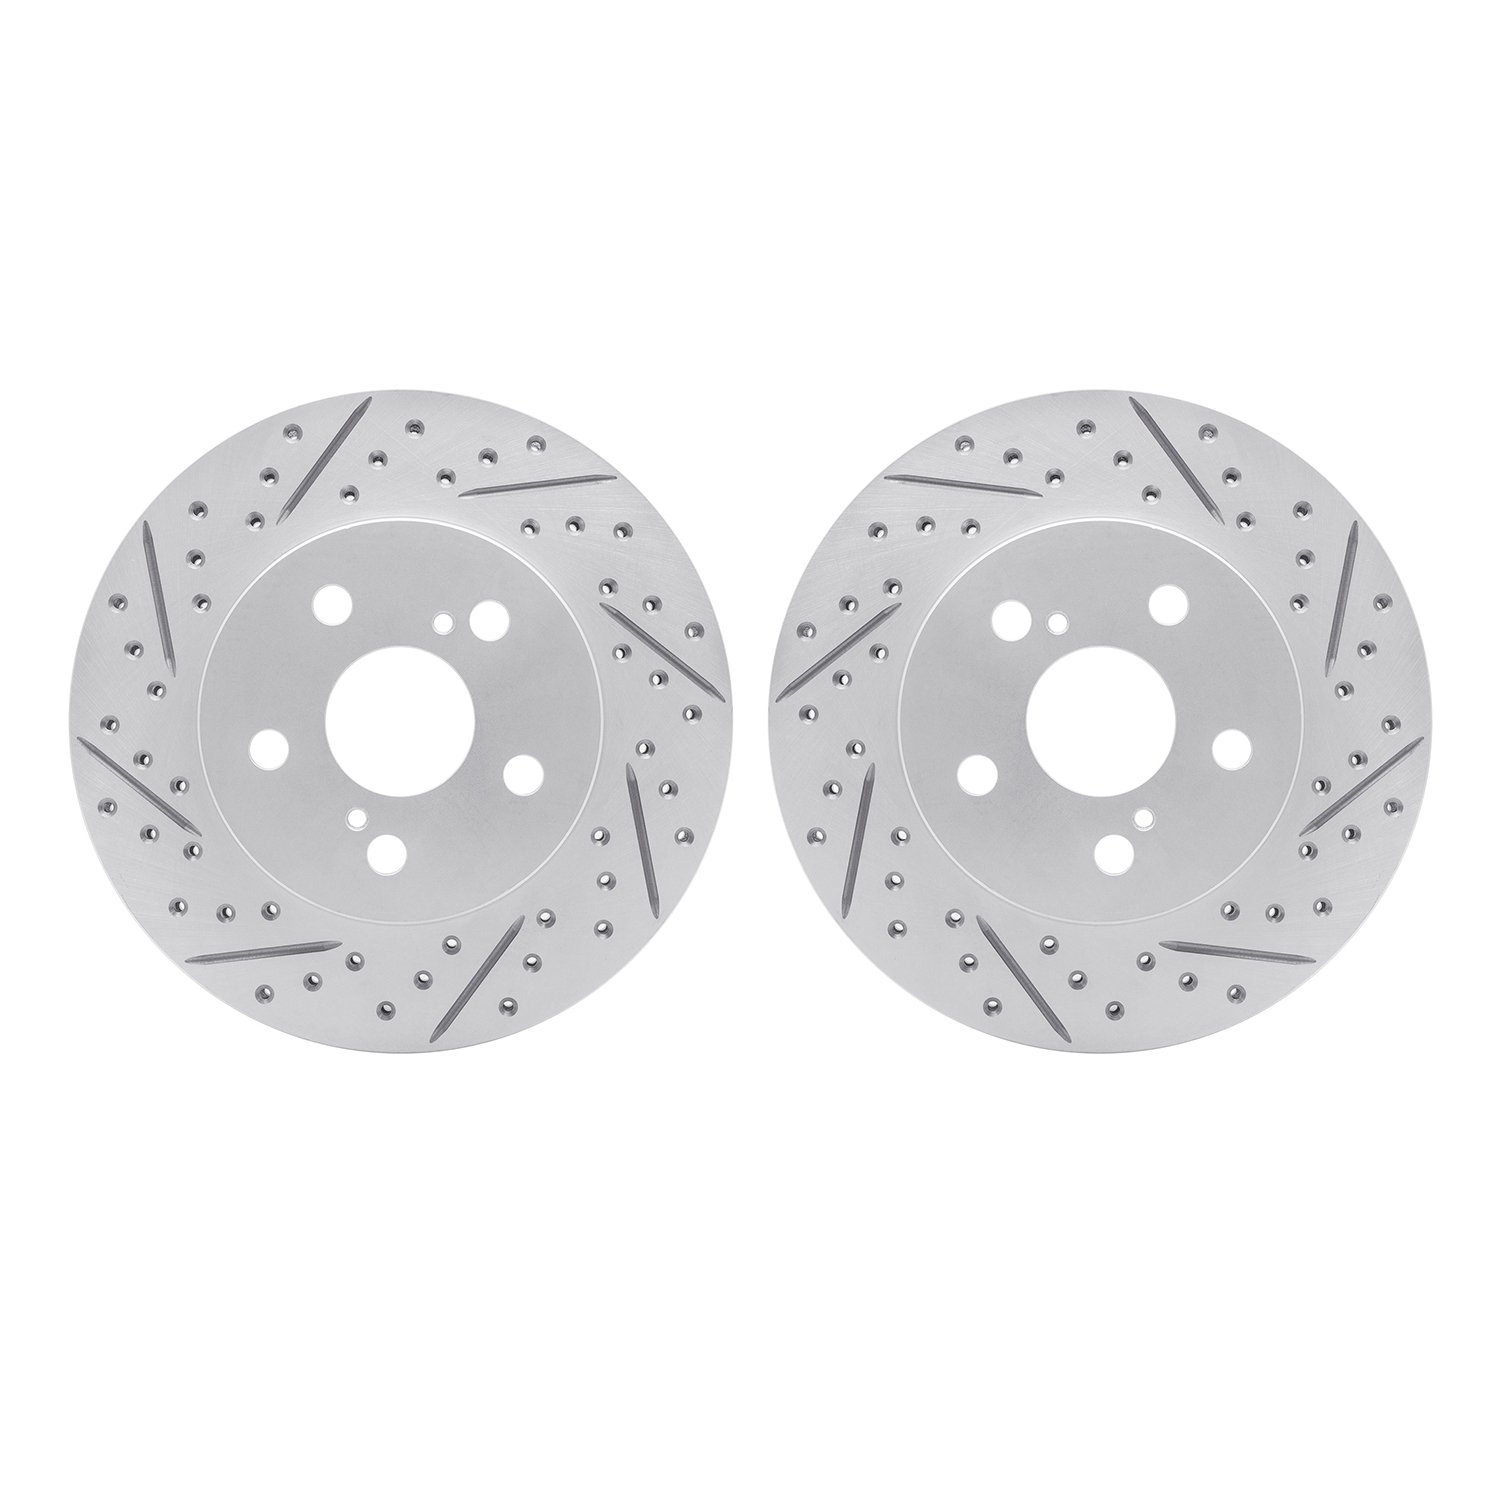 2002-76025 Geoperformance Drilled/Slotted Brake Rotors, Fits Select Lexus/Toyota/Scion, Position: Front